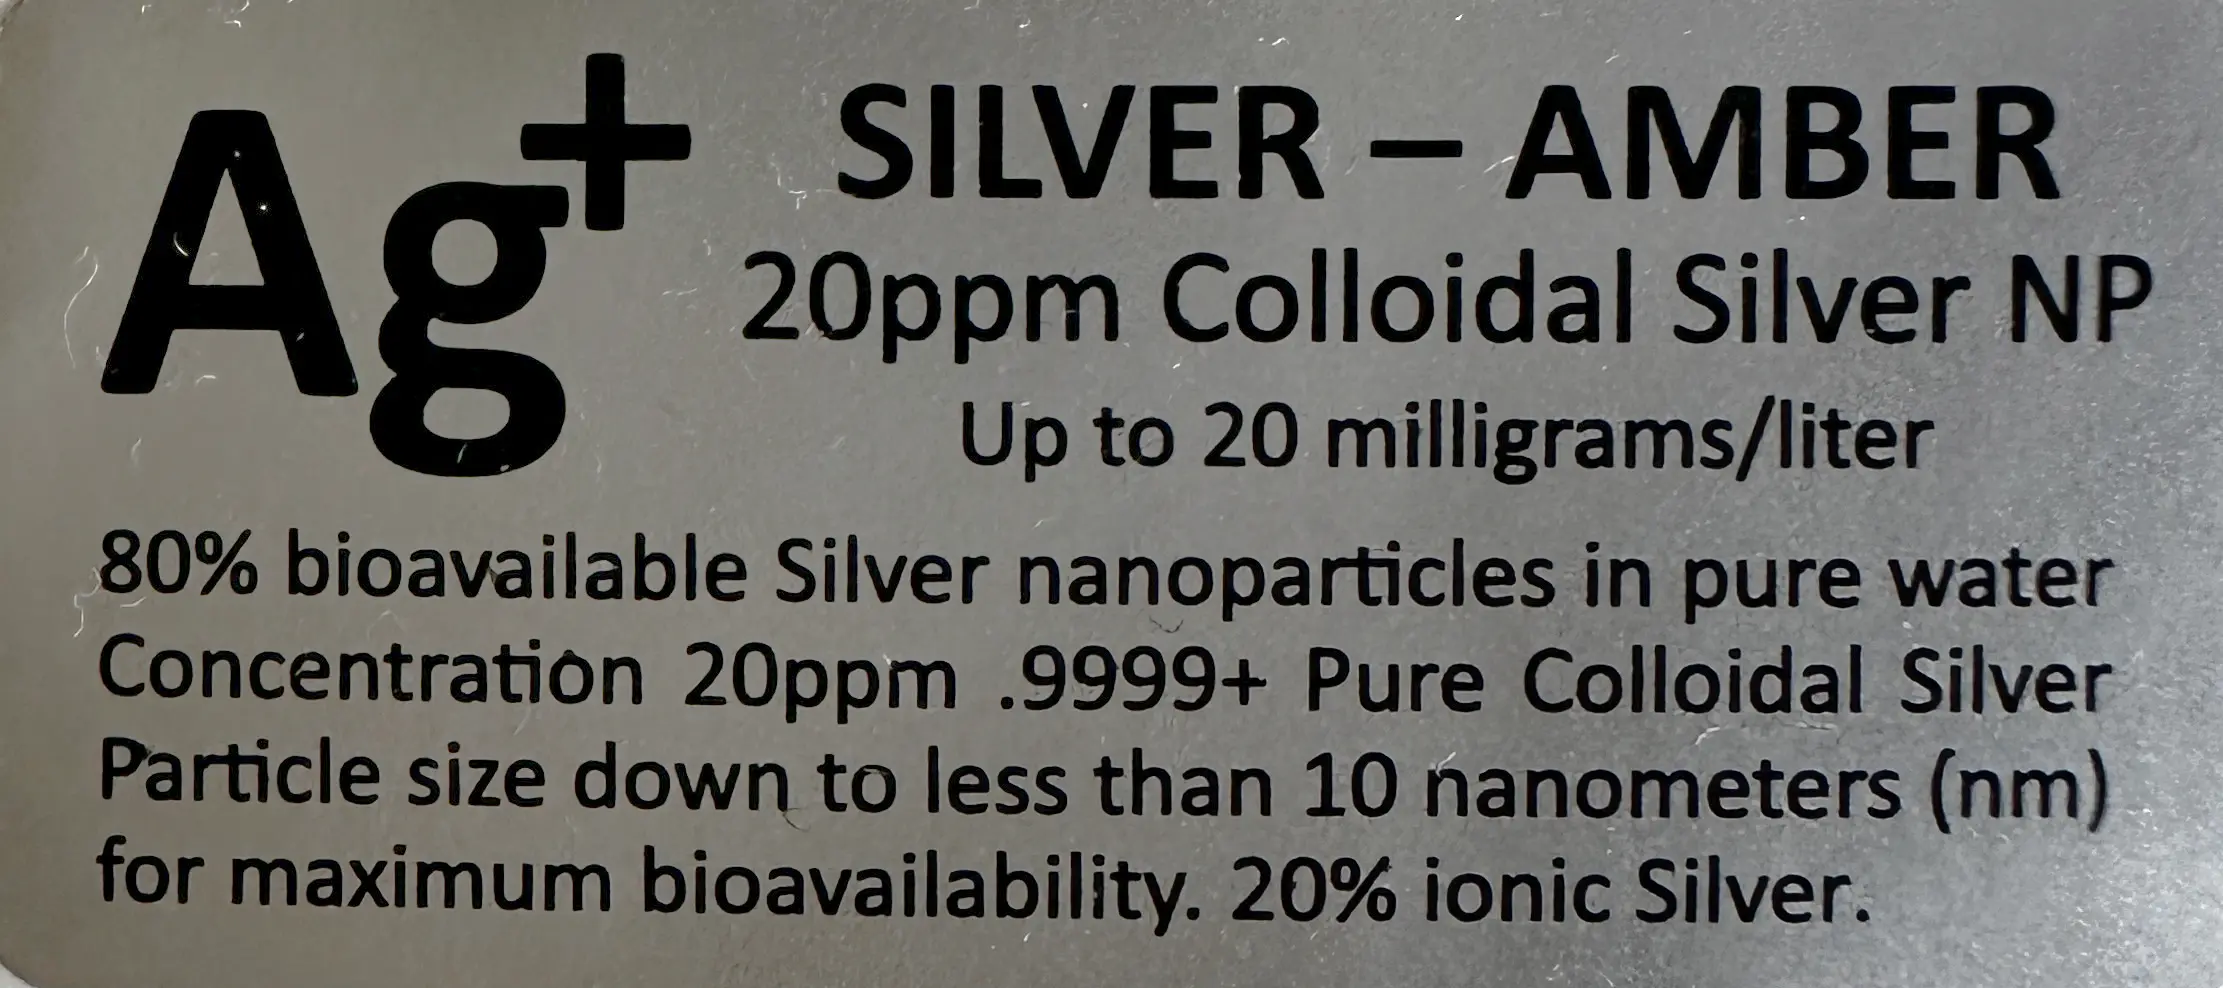 Collidal Silver - 20ppm, 500ml